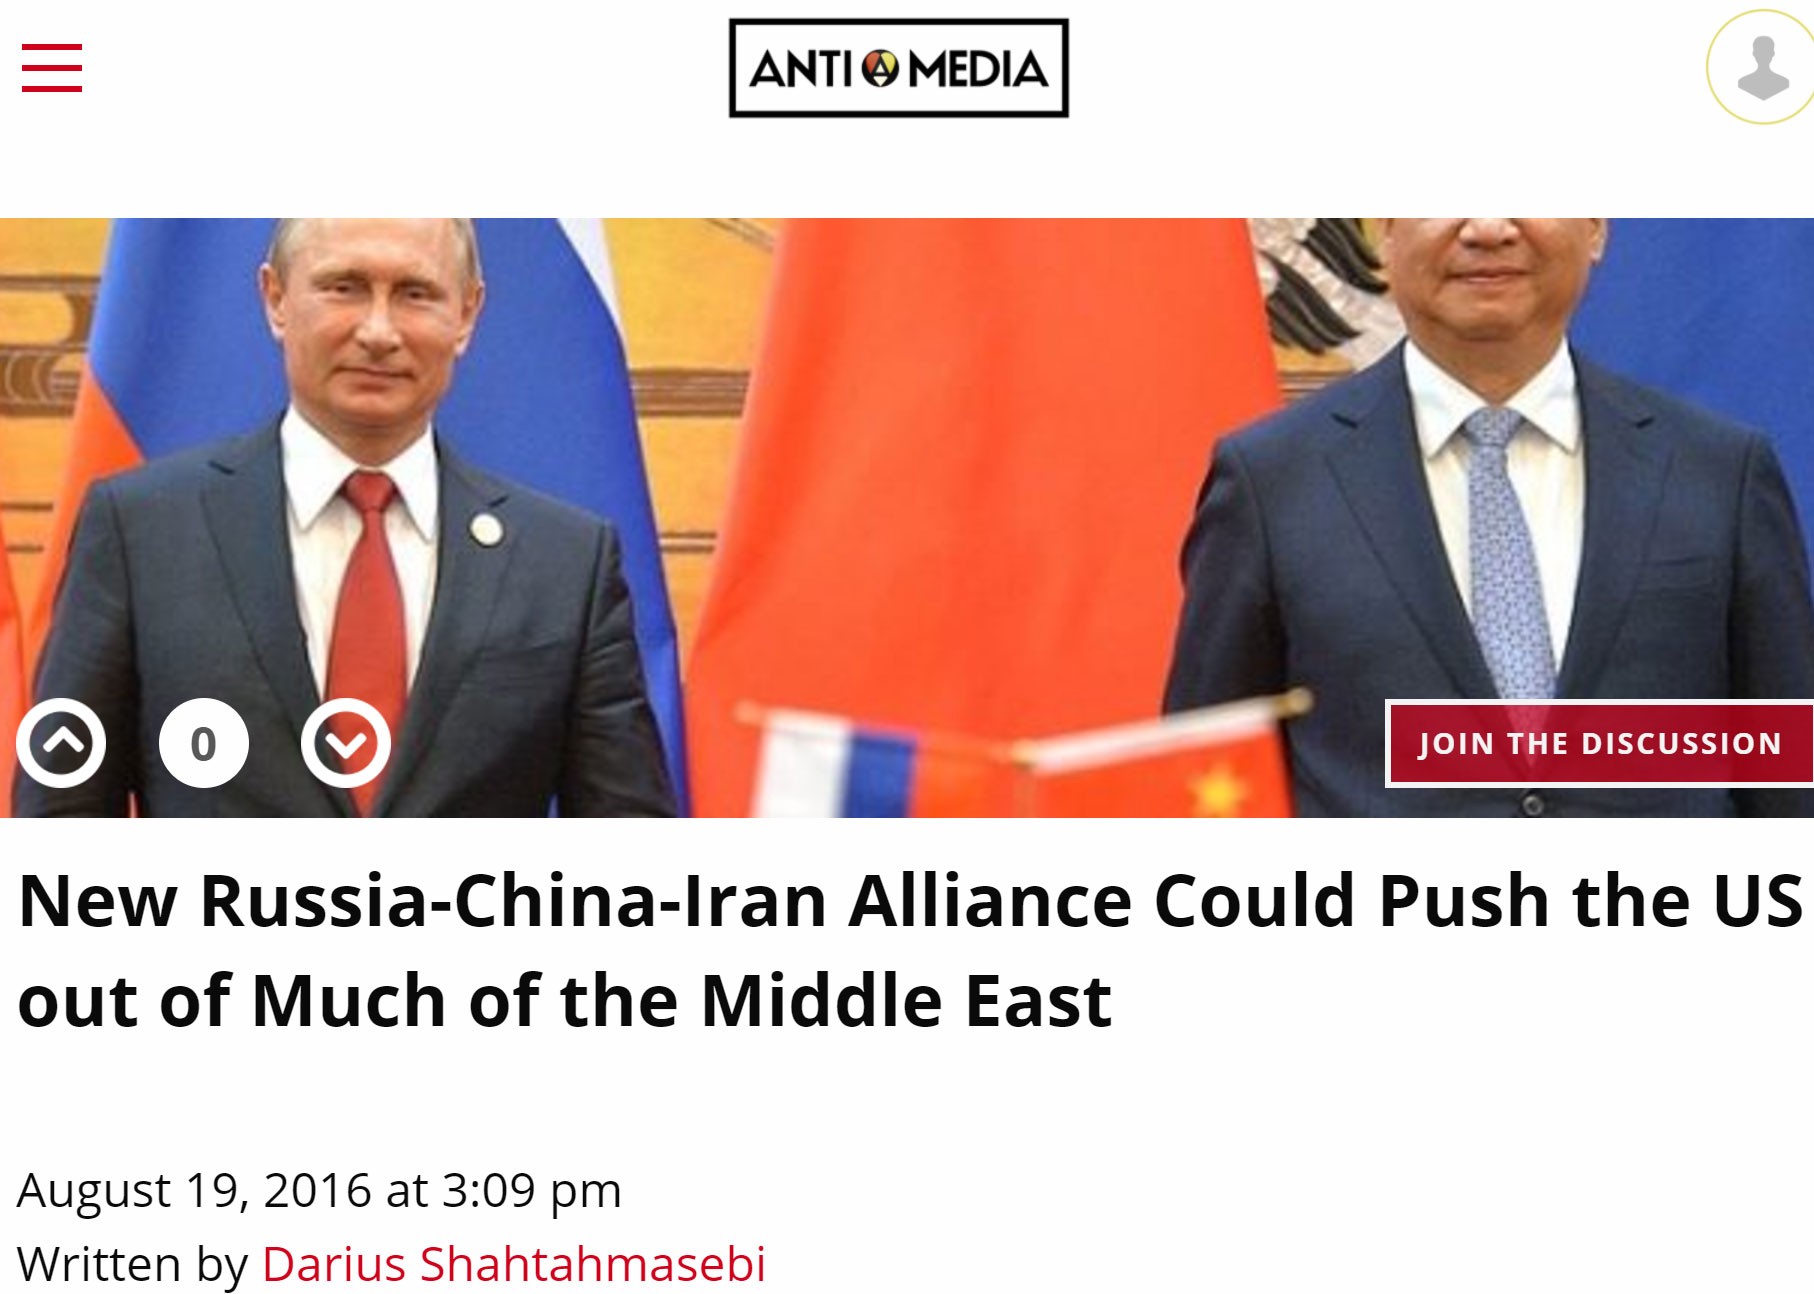 27-New-Russia-China-Iran-Alliance-Could-Push-the-US-out-of-Much-of-the-Middle-East.jpg